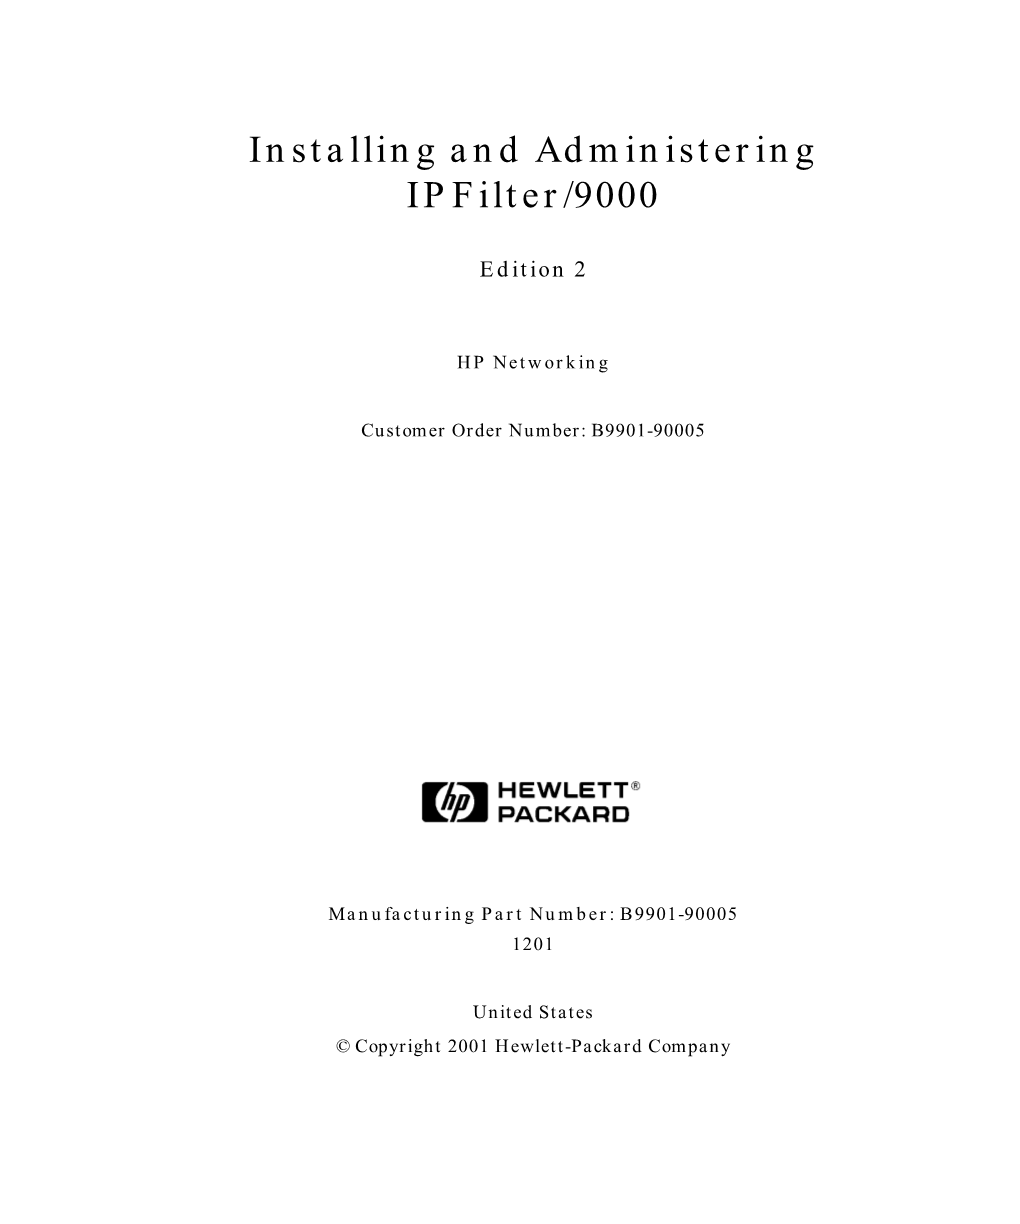 Installing and Administering Ipfilter/9000